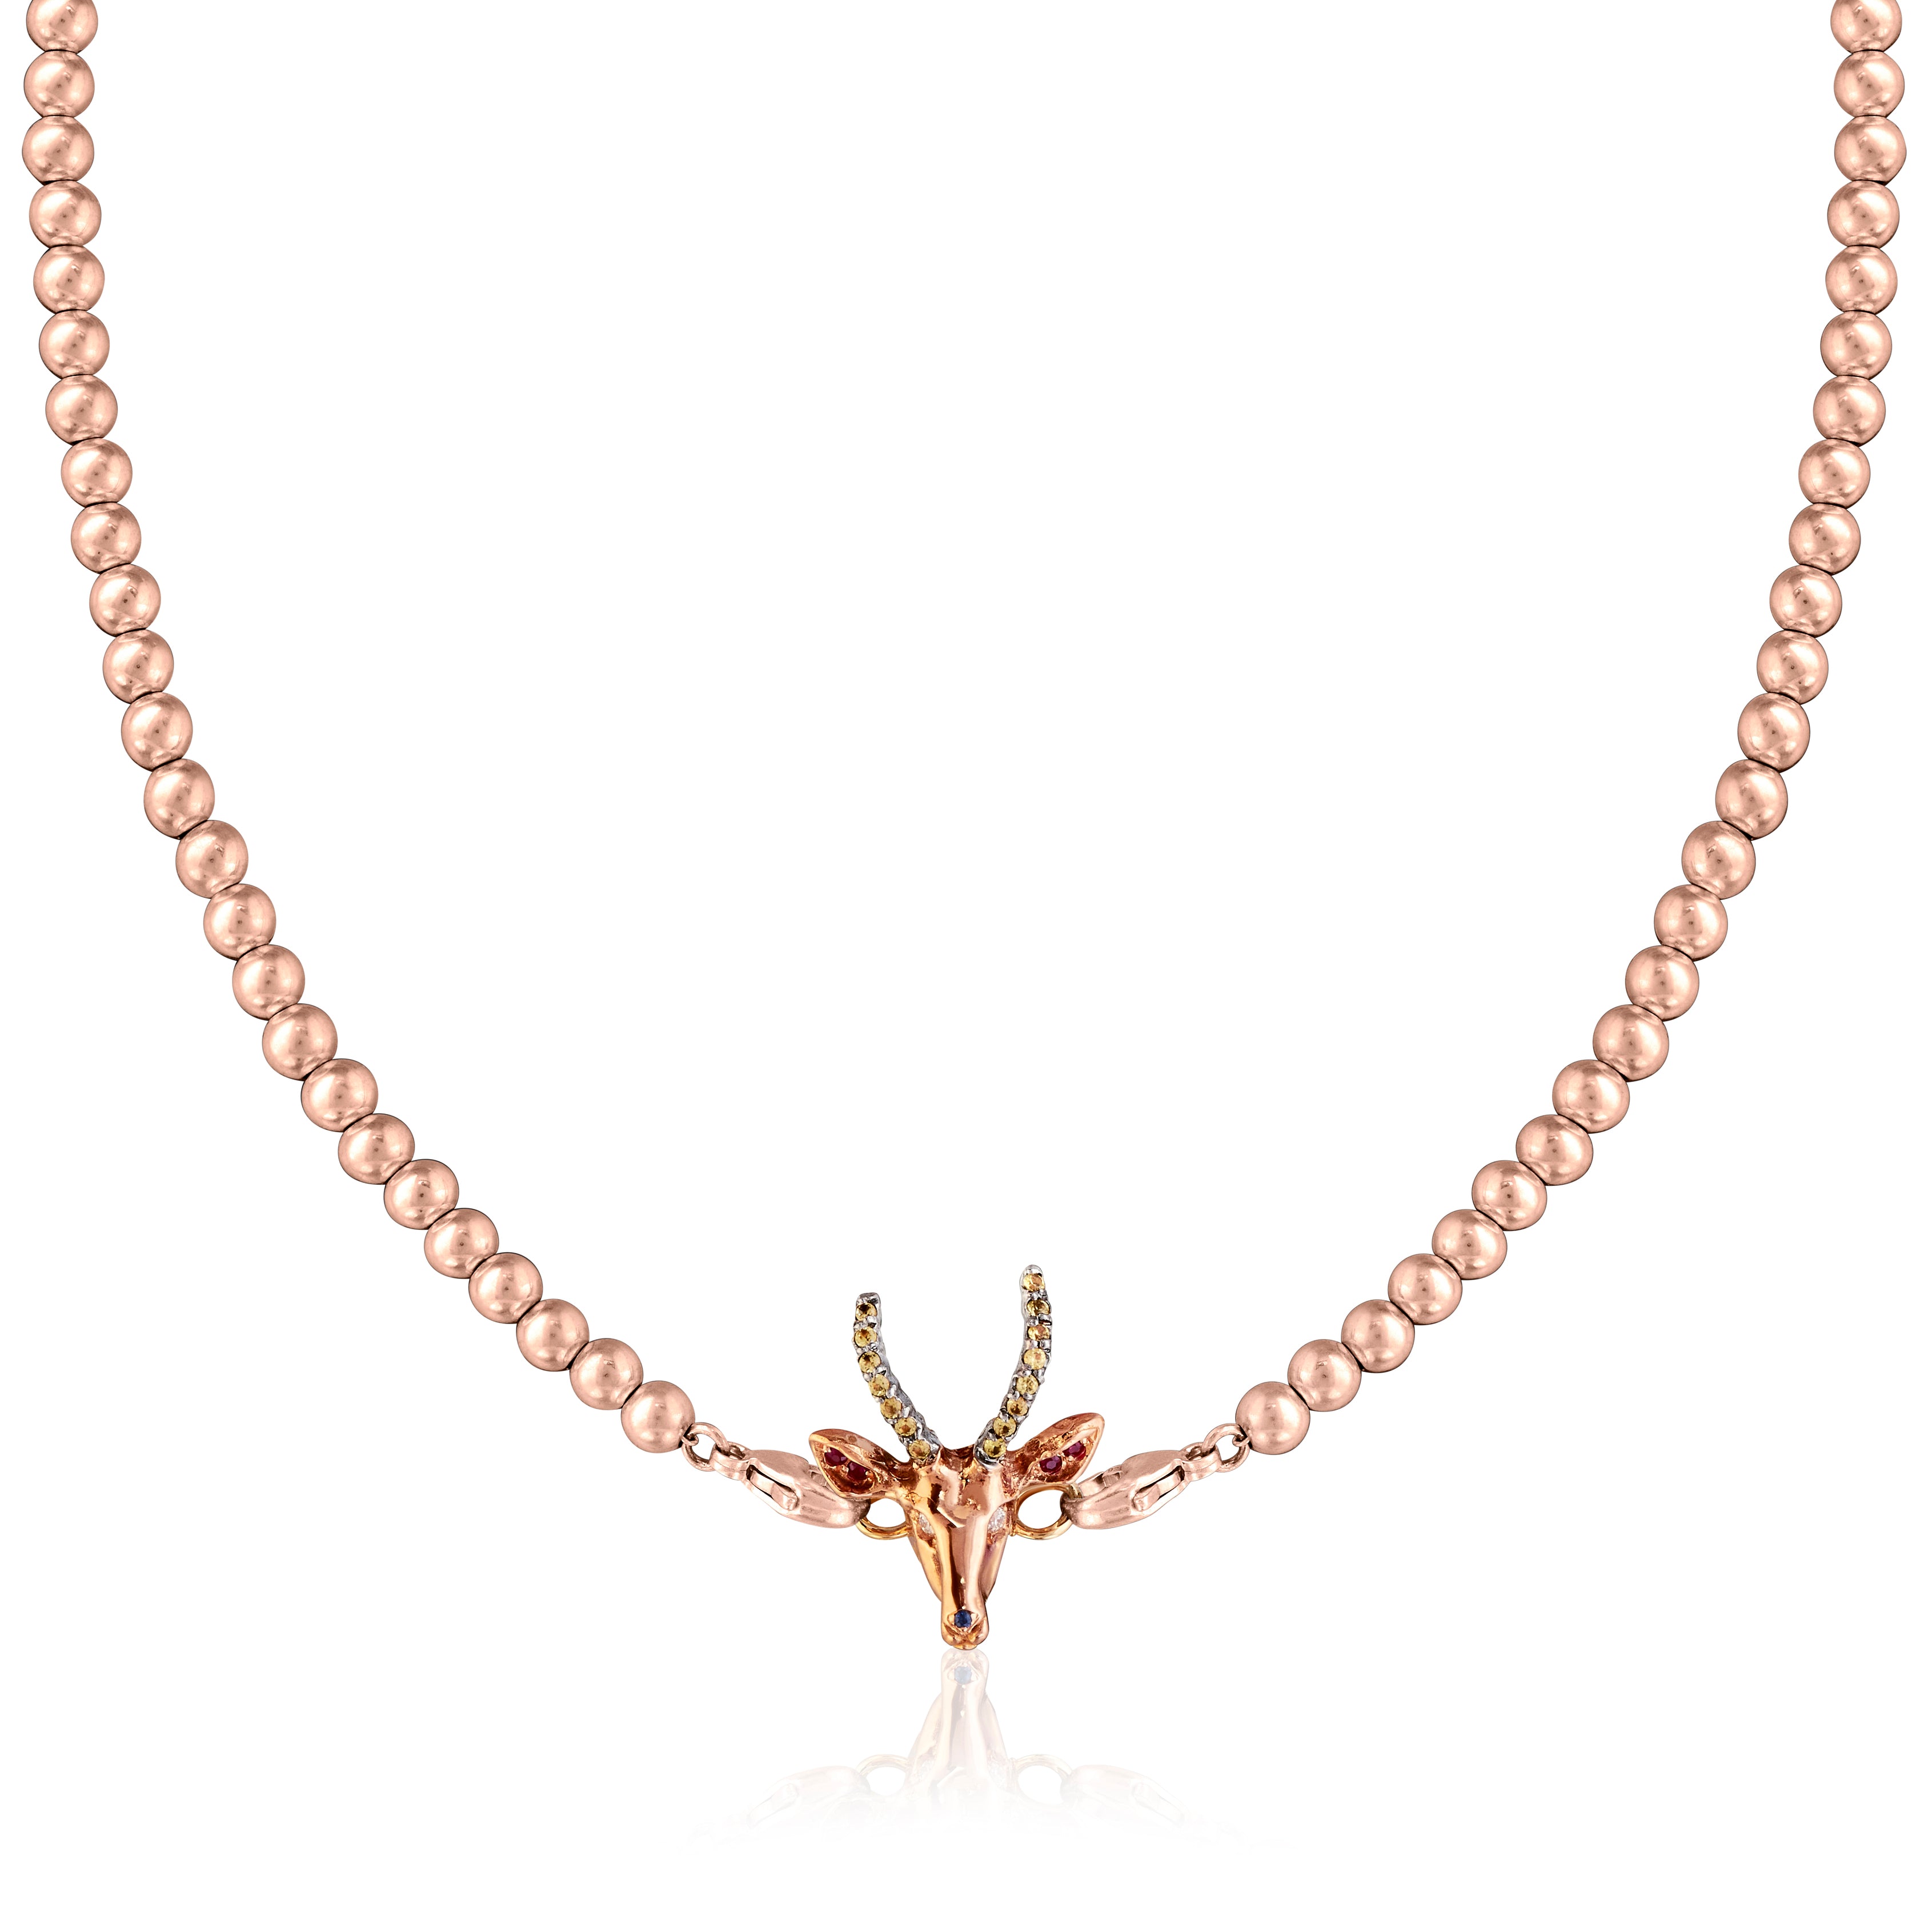 18ct Rose gold bead necklace